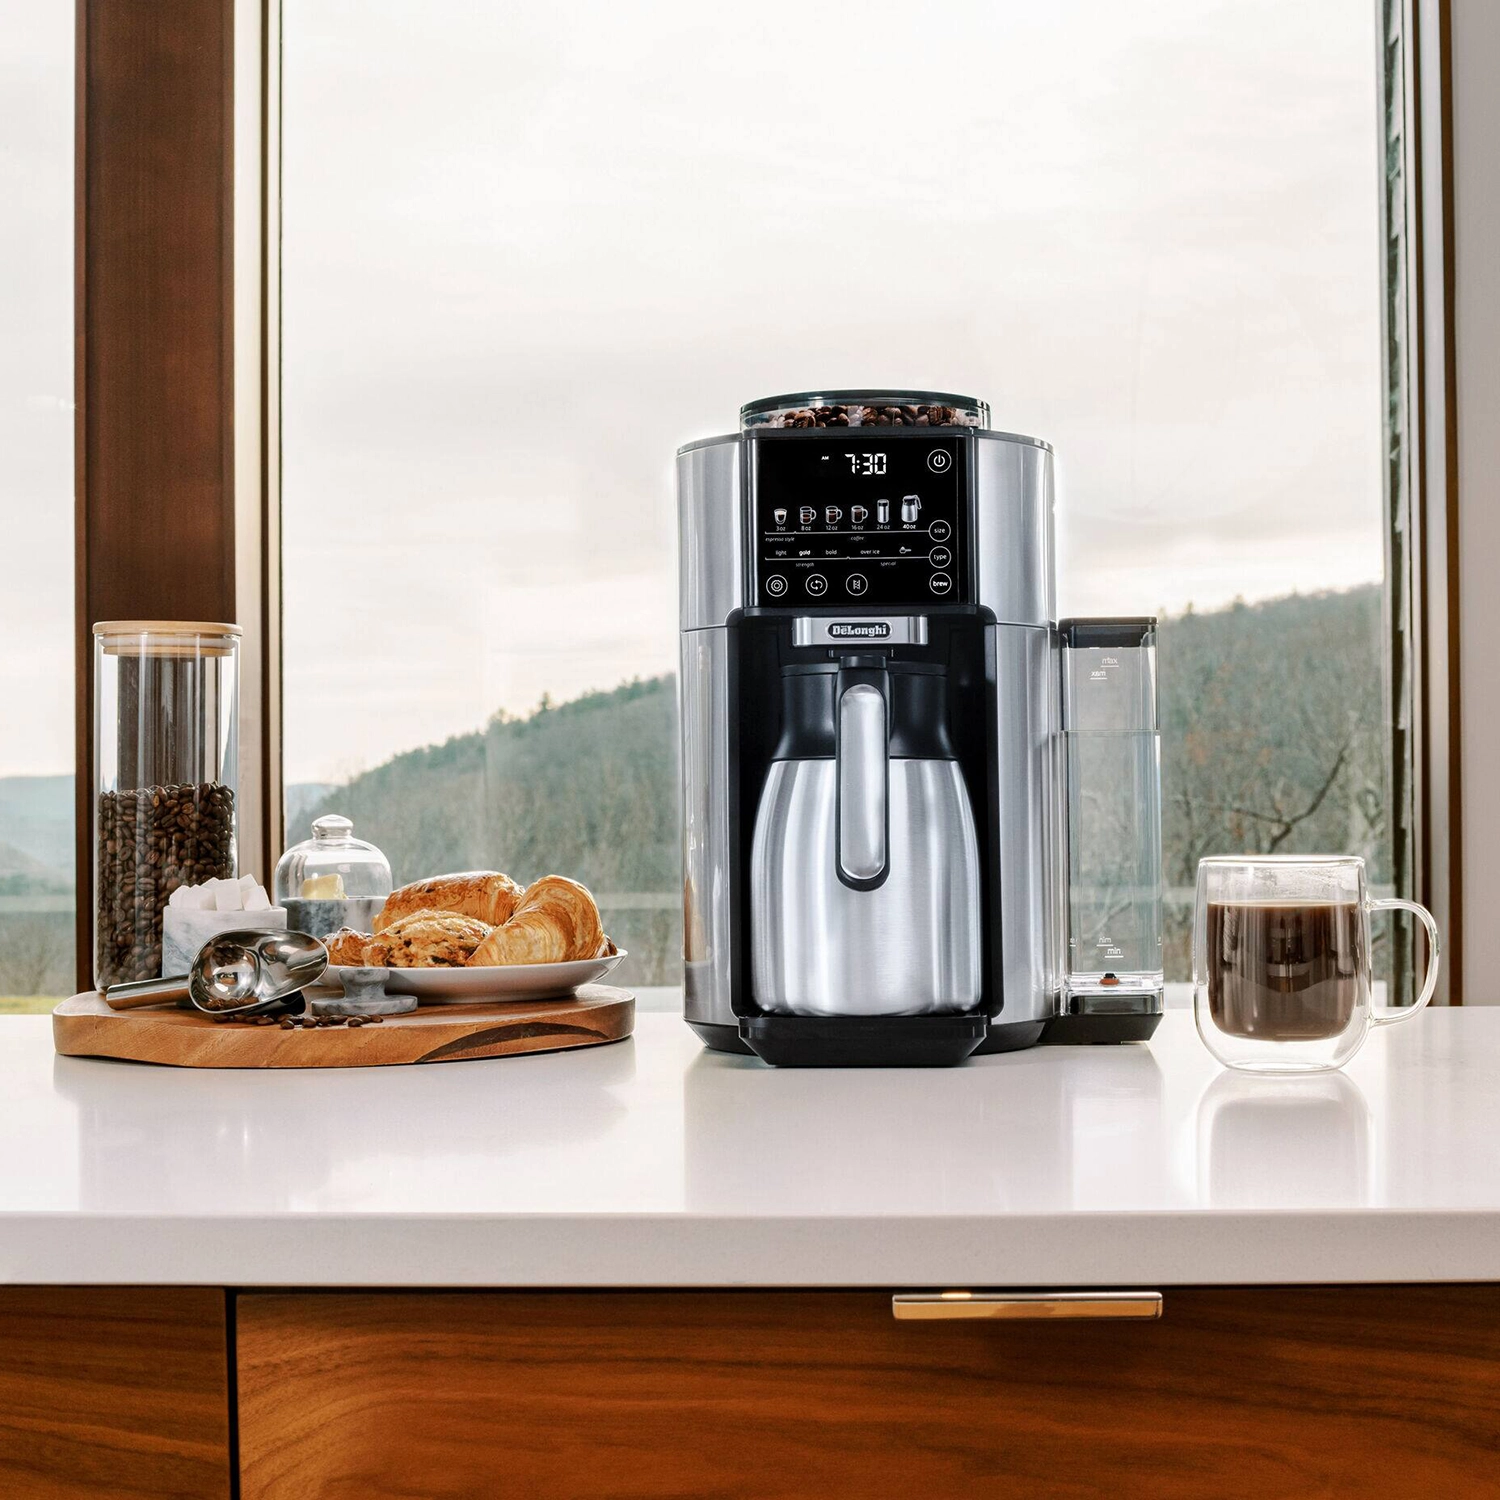 https://www.homethreads.com/files/delonghi/cam51035m-delonghi-truebrew-automatic-coffee-maker-with-bean-extract-technology-10.webp